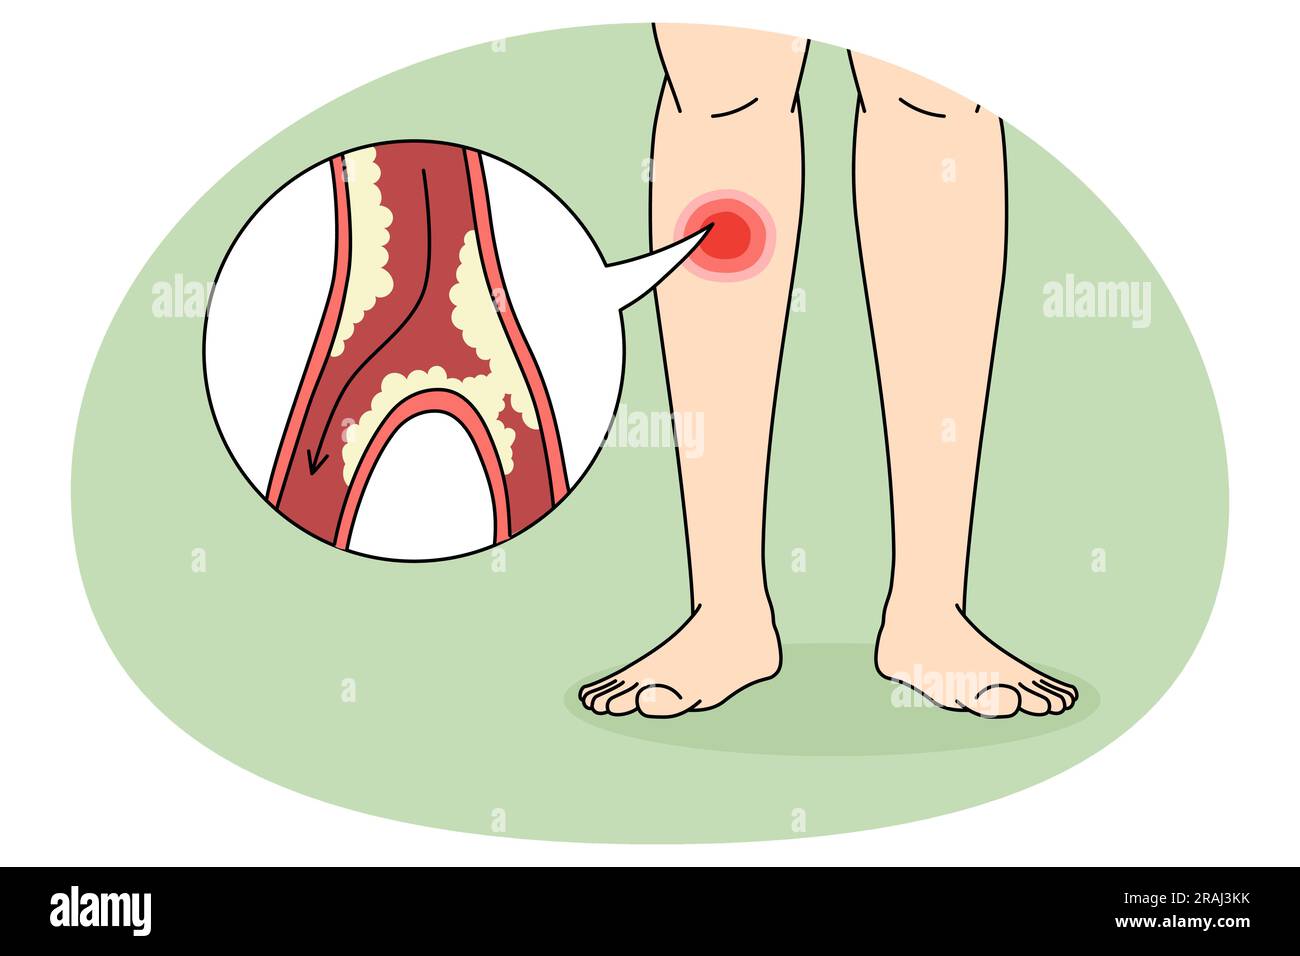 Close up of person suffer from PAD disease having blood vessel blockage in legs. Man struggle with clotted limbs from veins narrowing or blocking. Healthcare concept. Vector illustration. Stock Vector